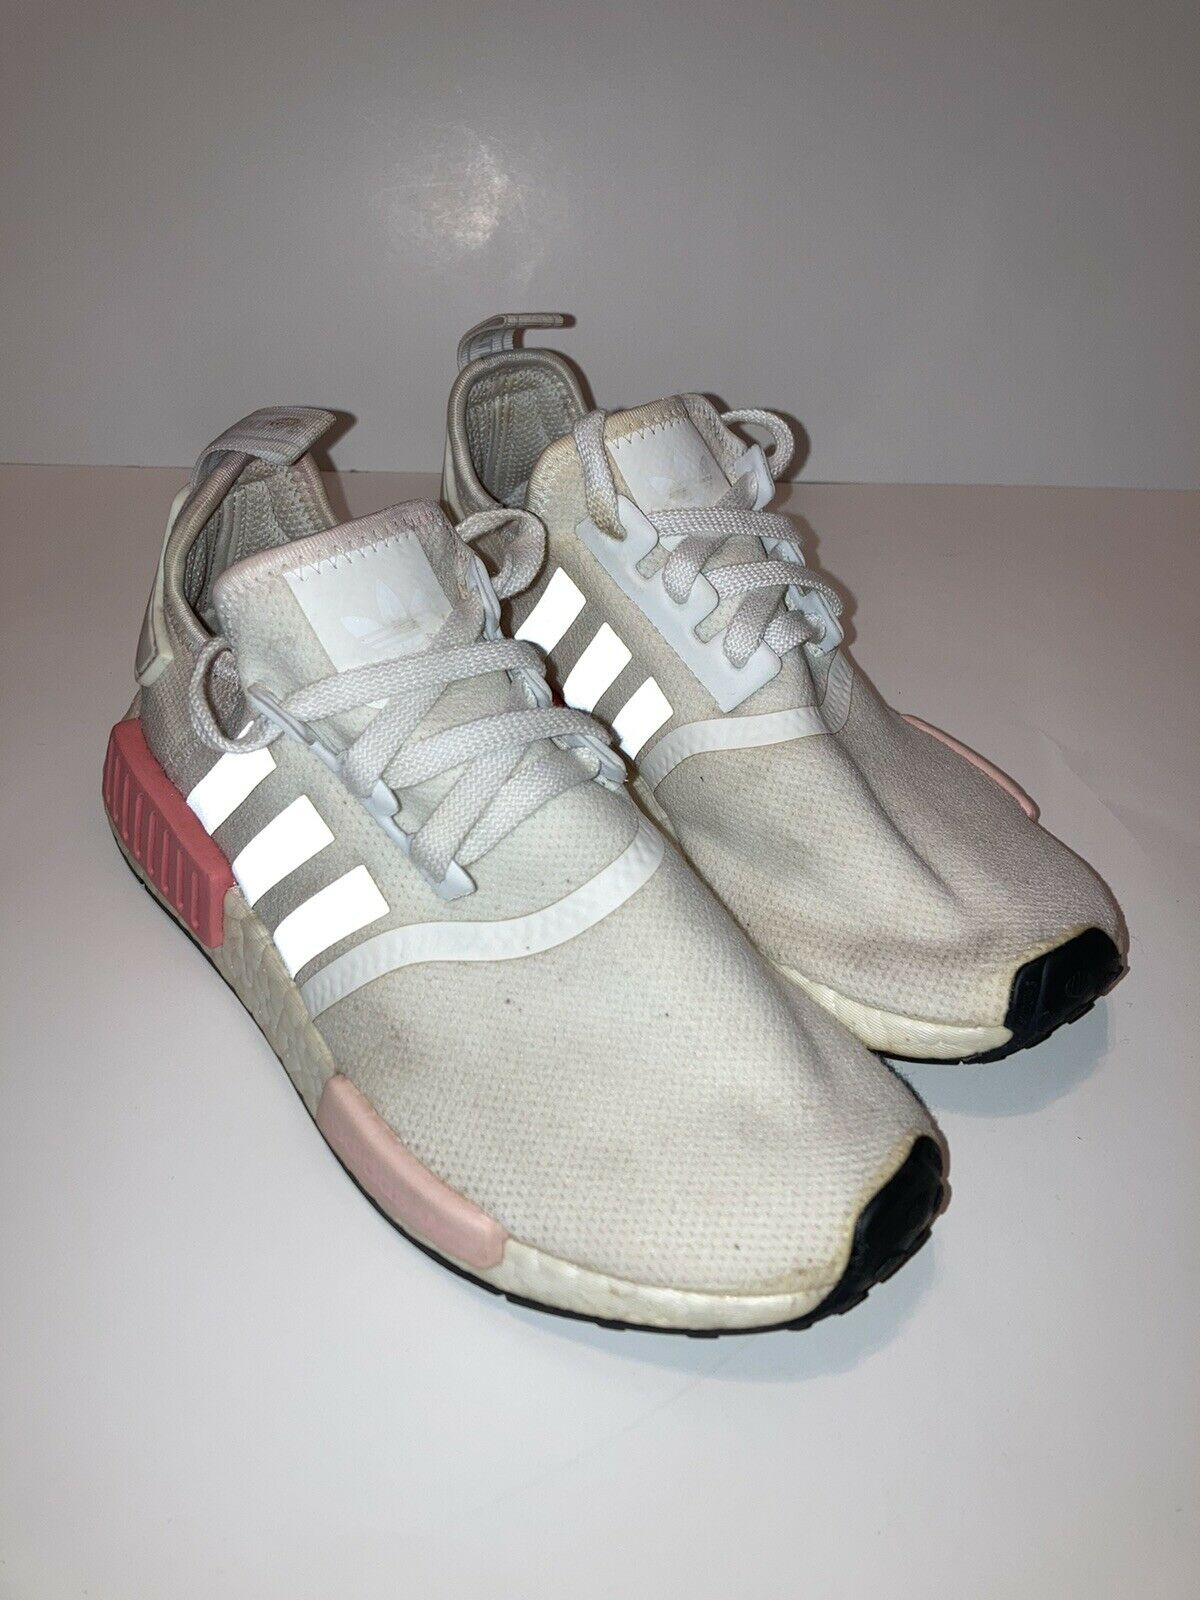 Women’s Adidas NMD_R1 White Rose Boost Athletic Shoes Size 7 BY9952